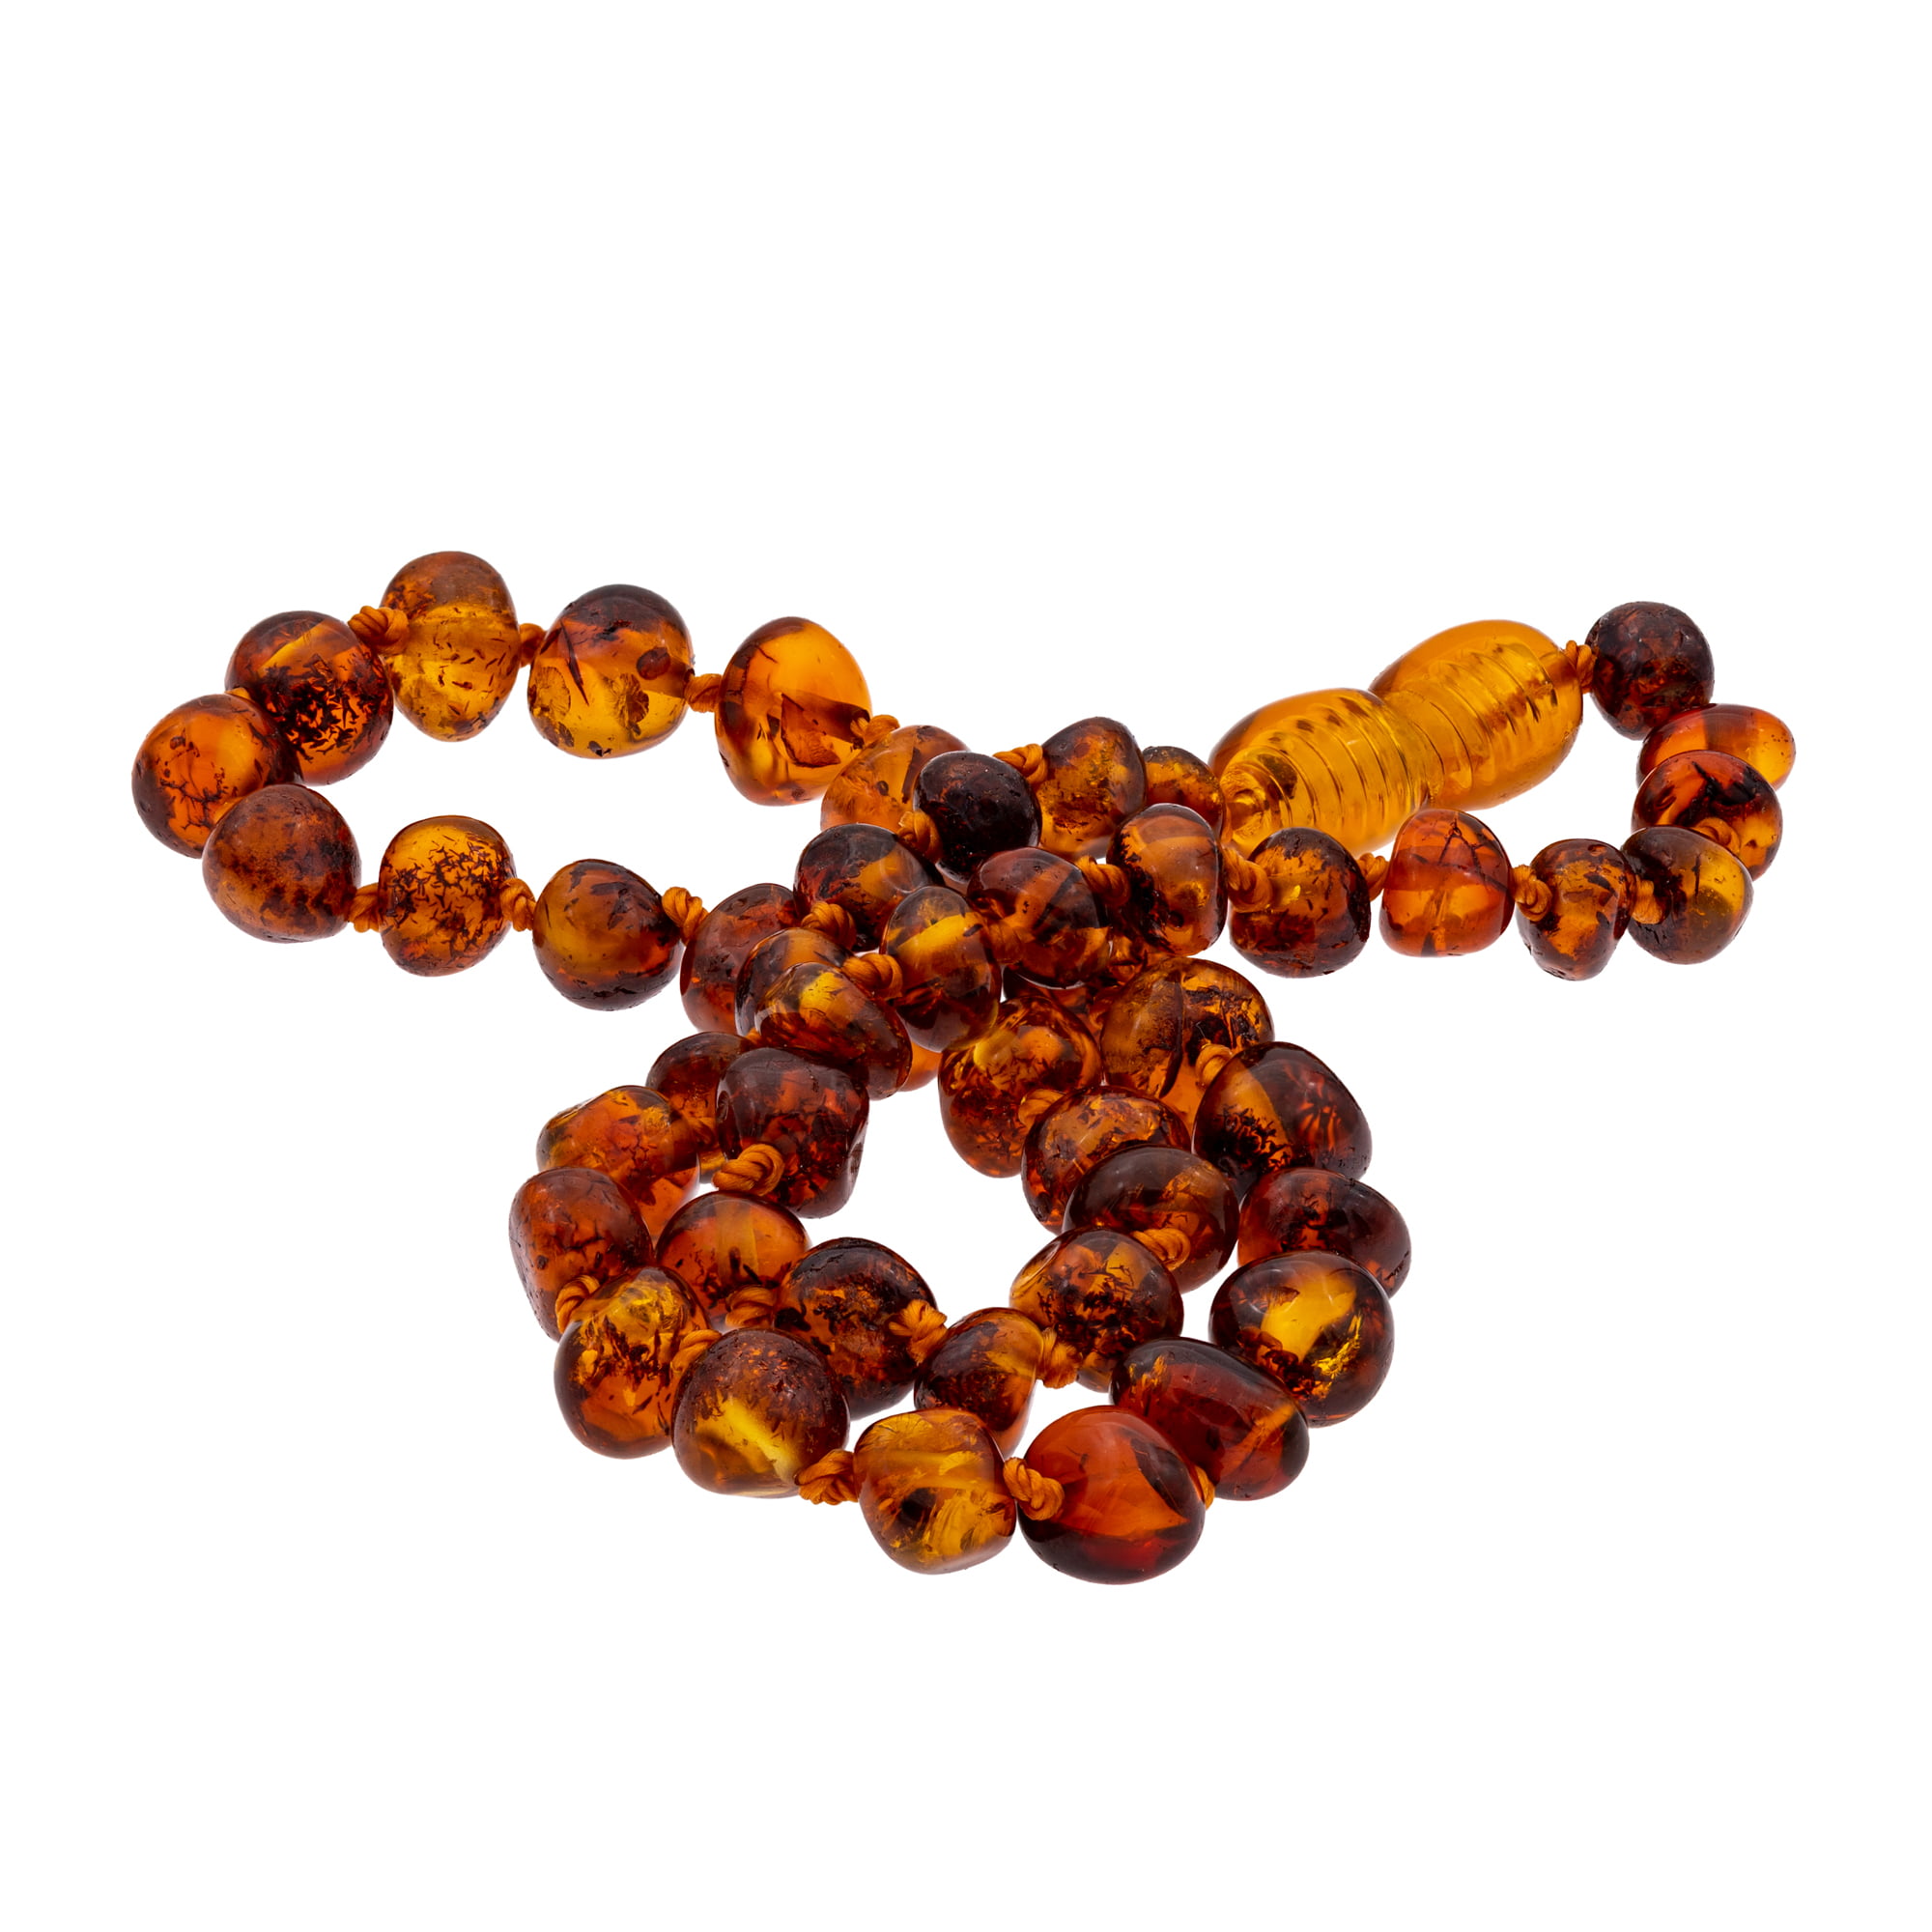 Details about   8 Inch 12 Carat Sparkling Brown Red Rough Diamond Beads 3mm To 3.5mm 